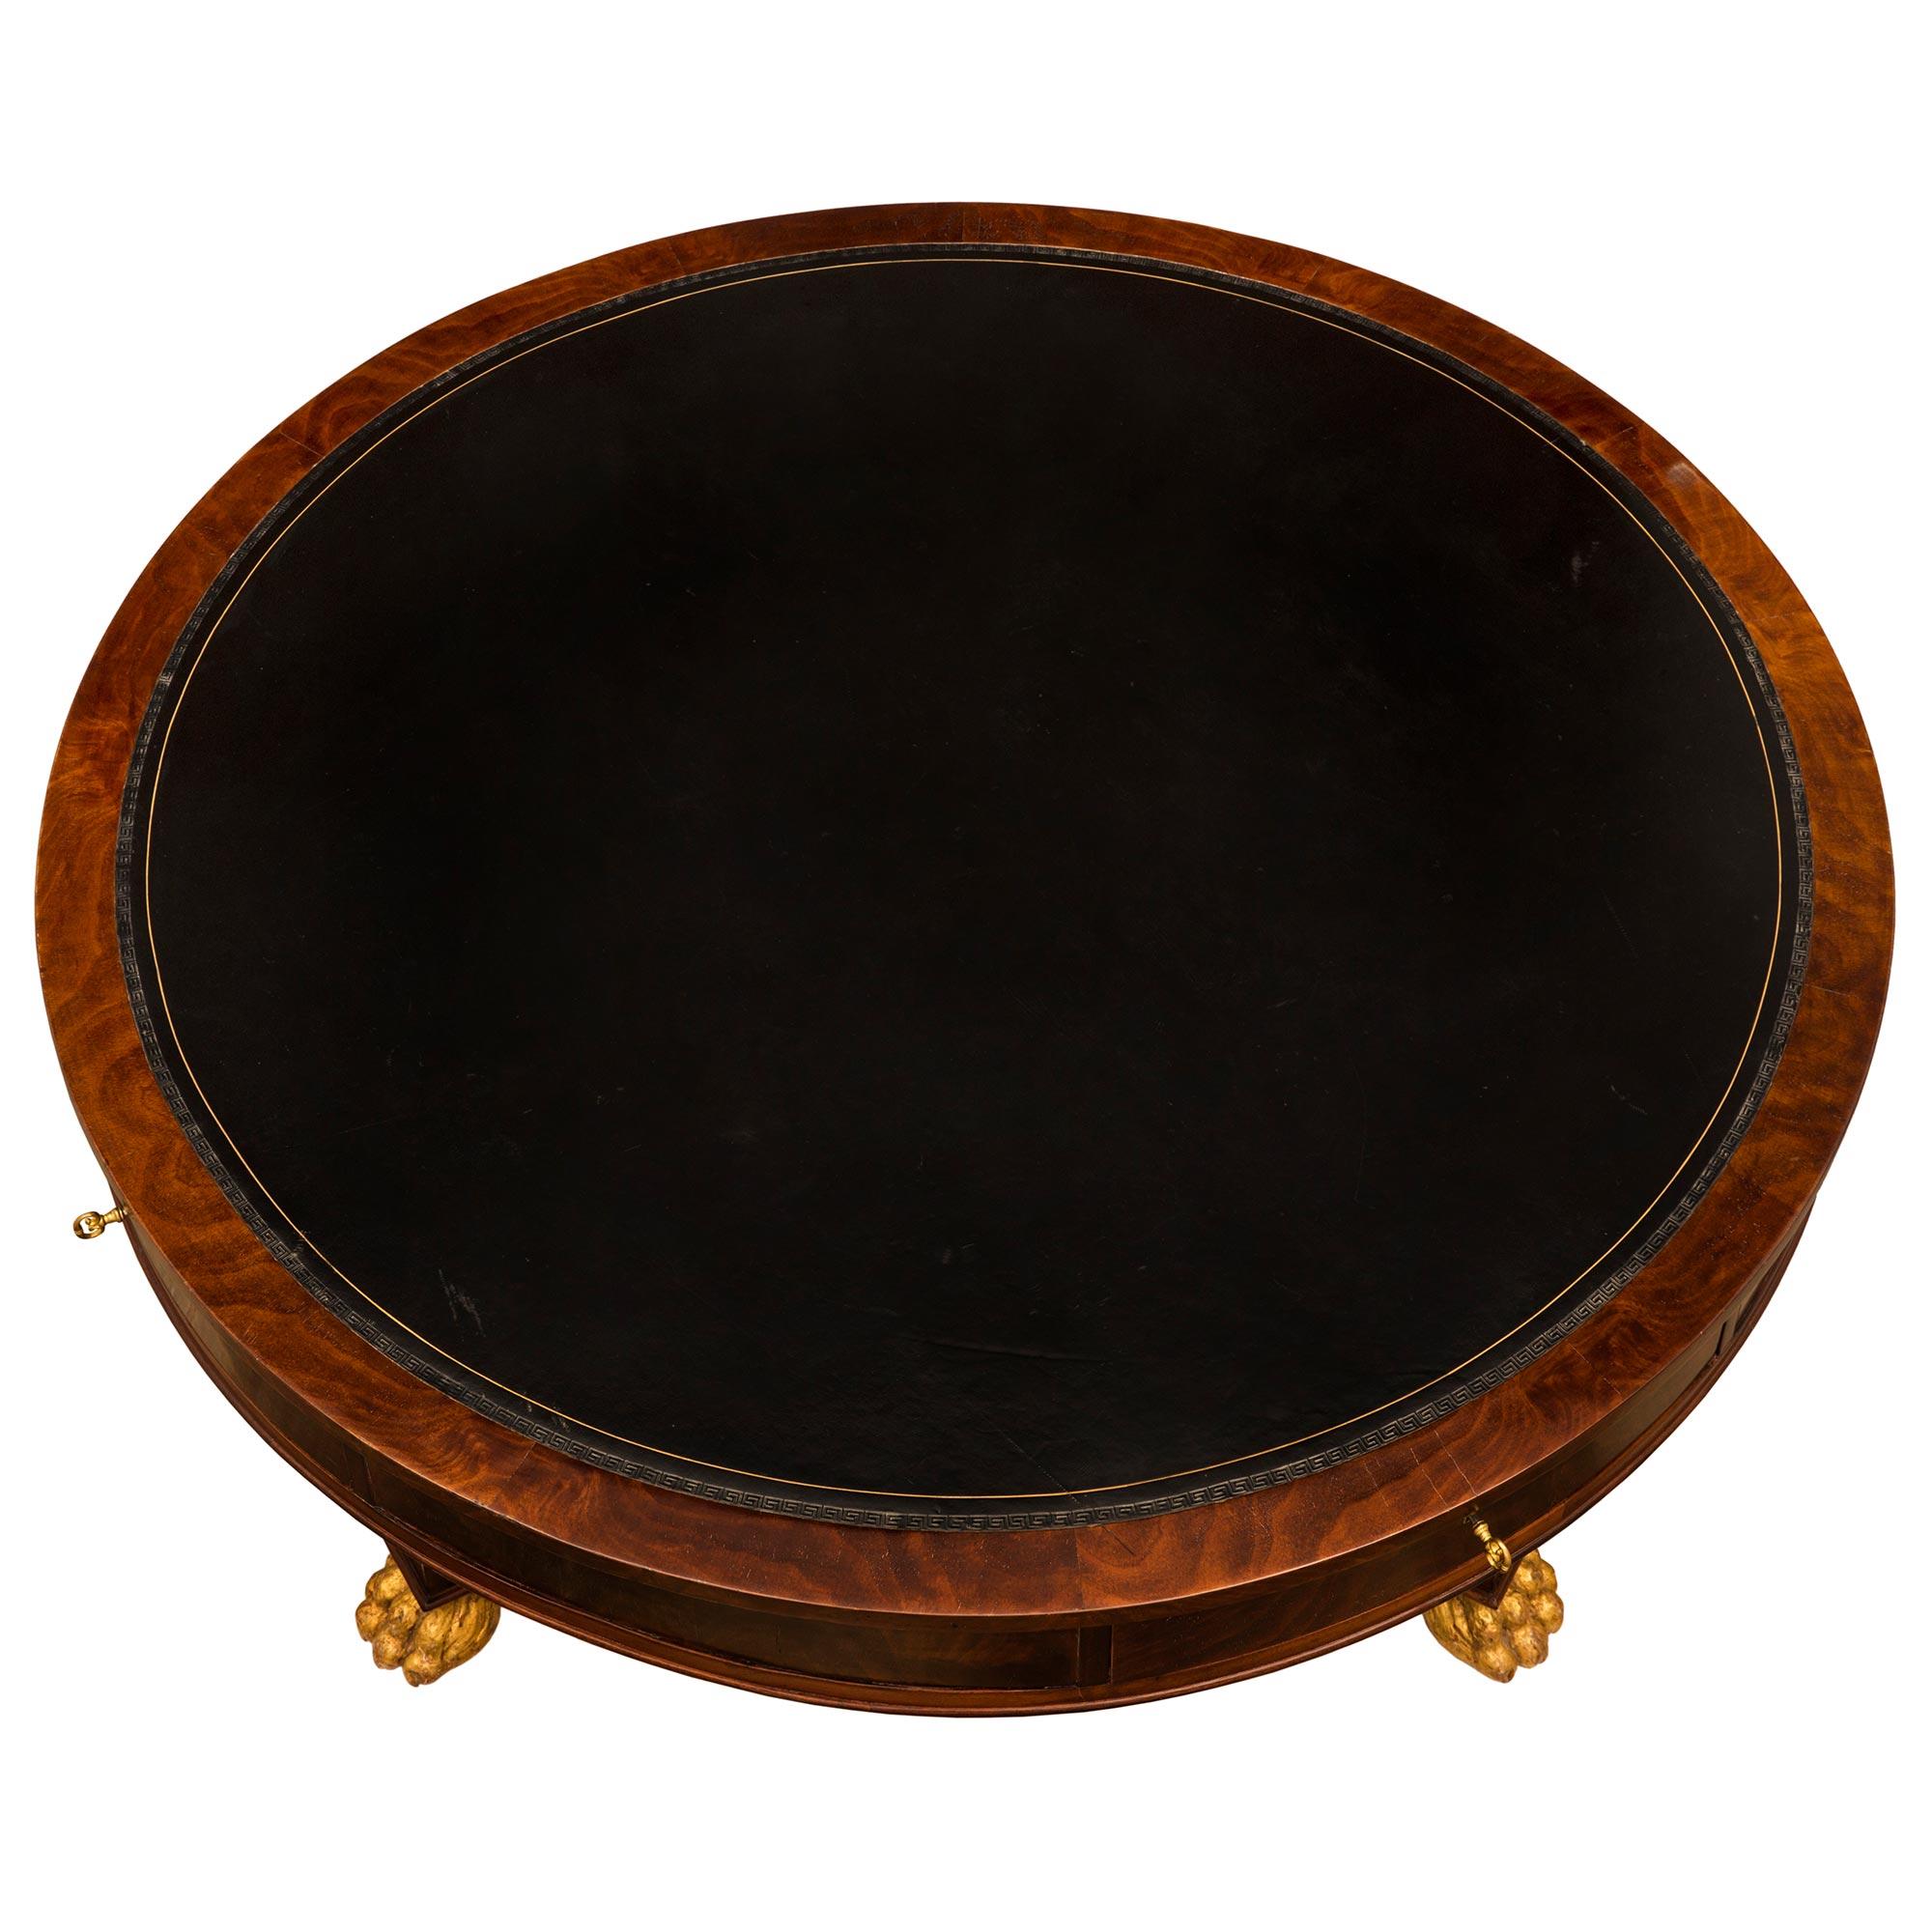 A stately and most handsome Italian 19th century Neo-Classical st. flamed Mahogany and giltwood library/center table. The four drawer circular table is raised by impressive richly carved giltwood paw feet below elegant circular fluted legs with